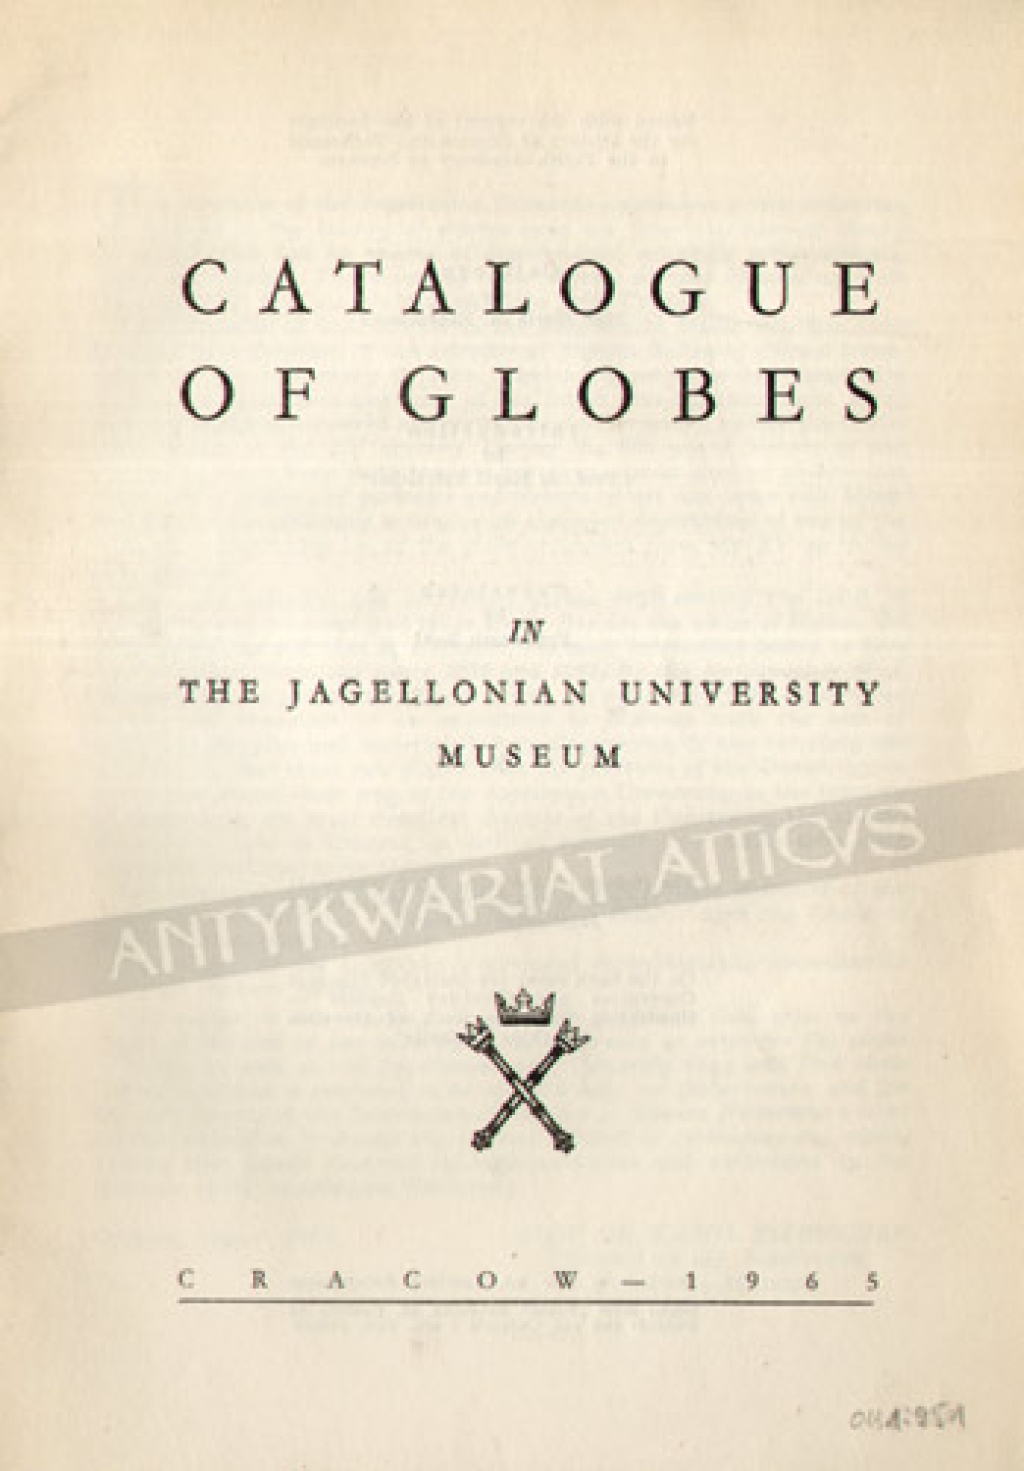 Catalogue of Globes in the Jagiellonian University Museum